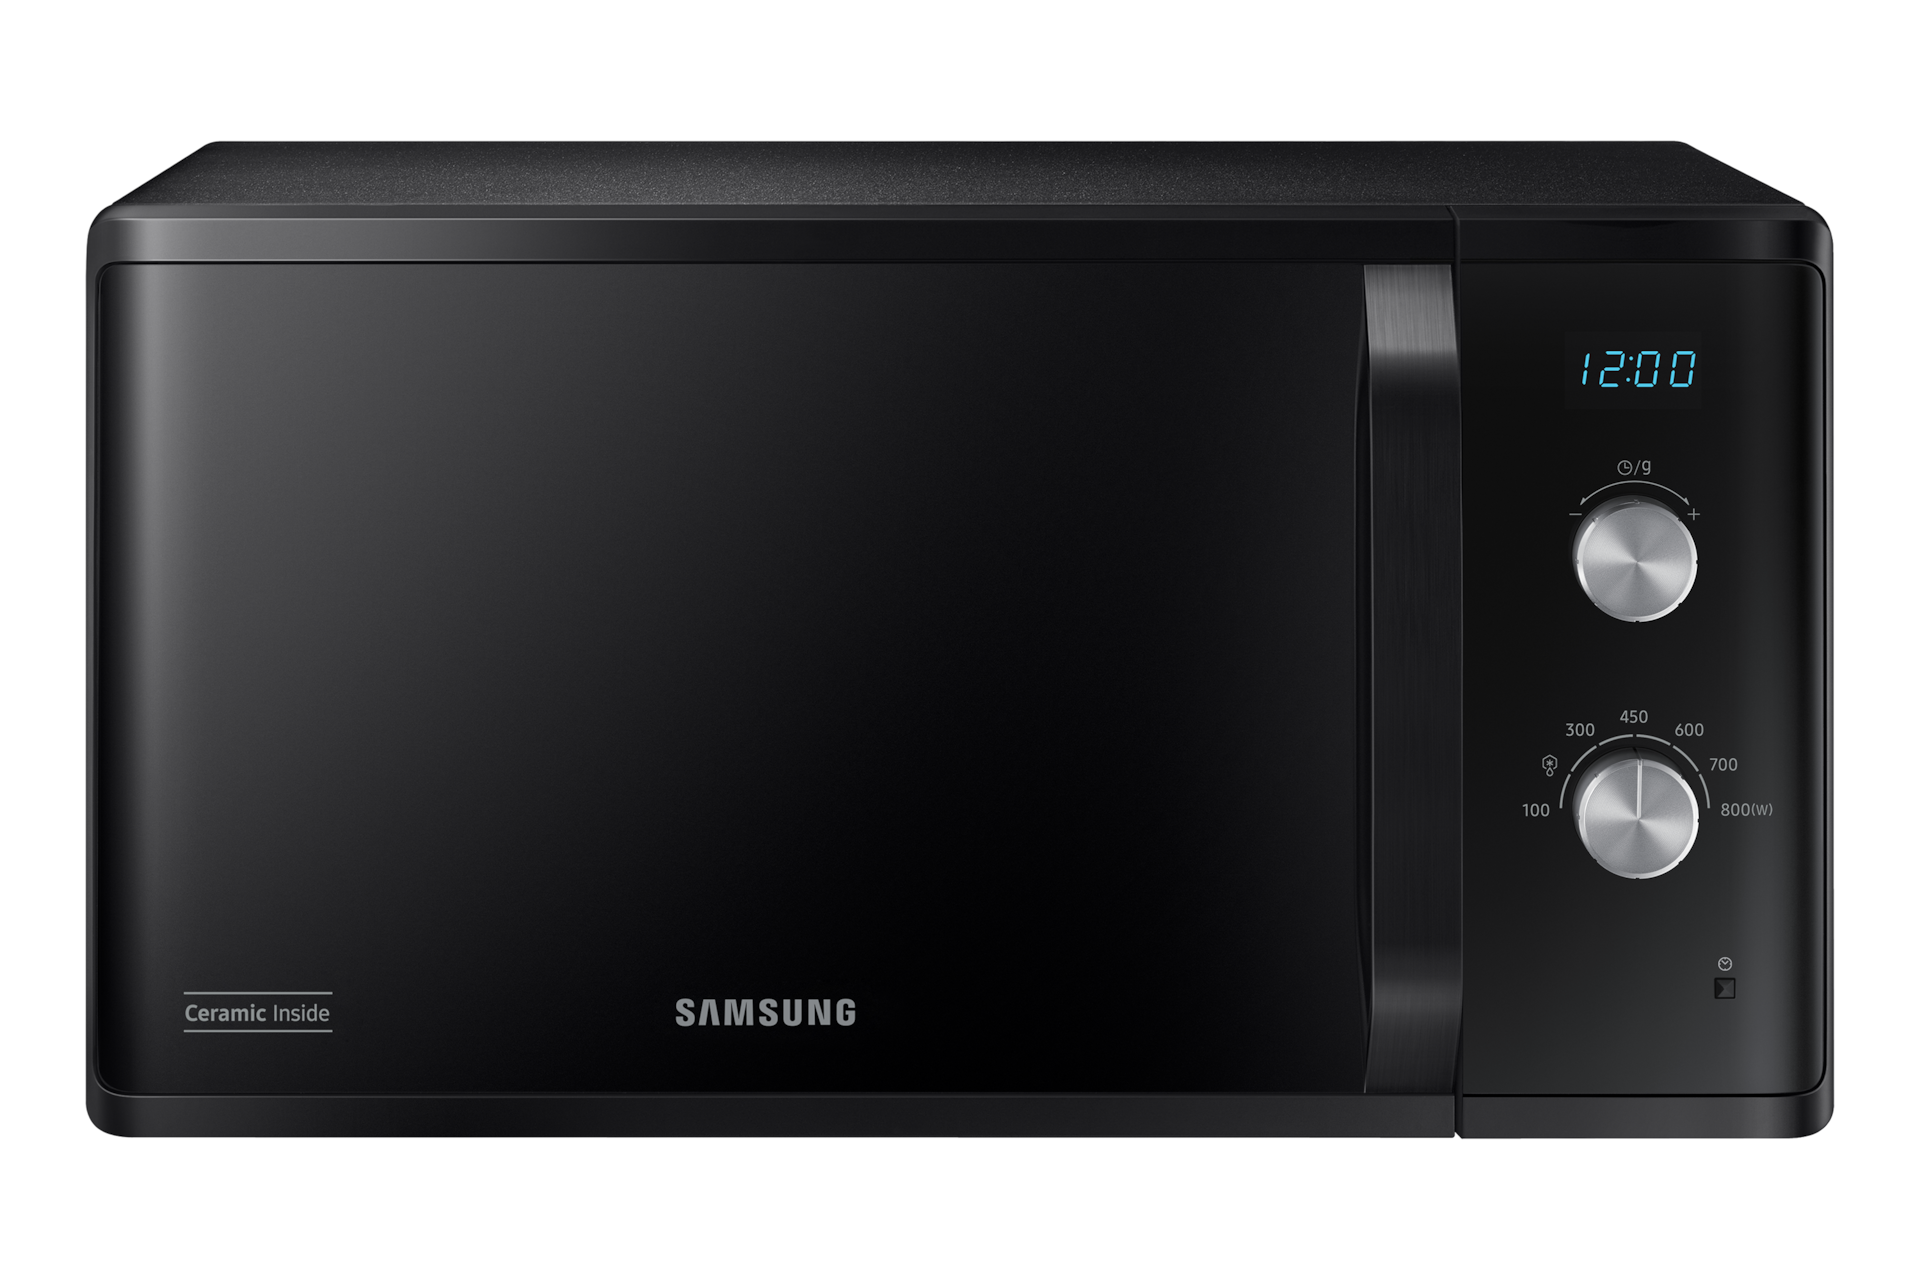 Samsung 23L, Electronic Solo, Microwave Oven, with With Auto Cook and 6 Power Levels, MS23Kk3614Ak in Black